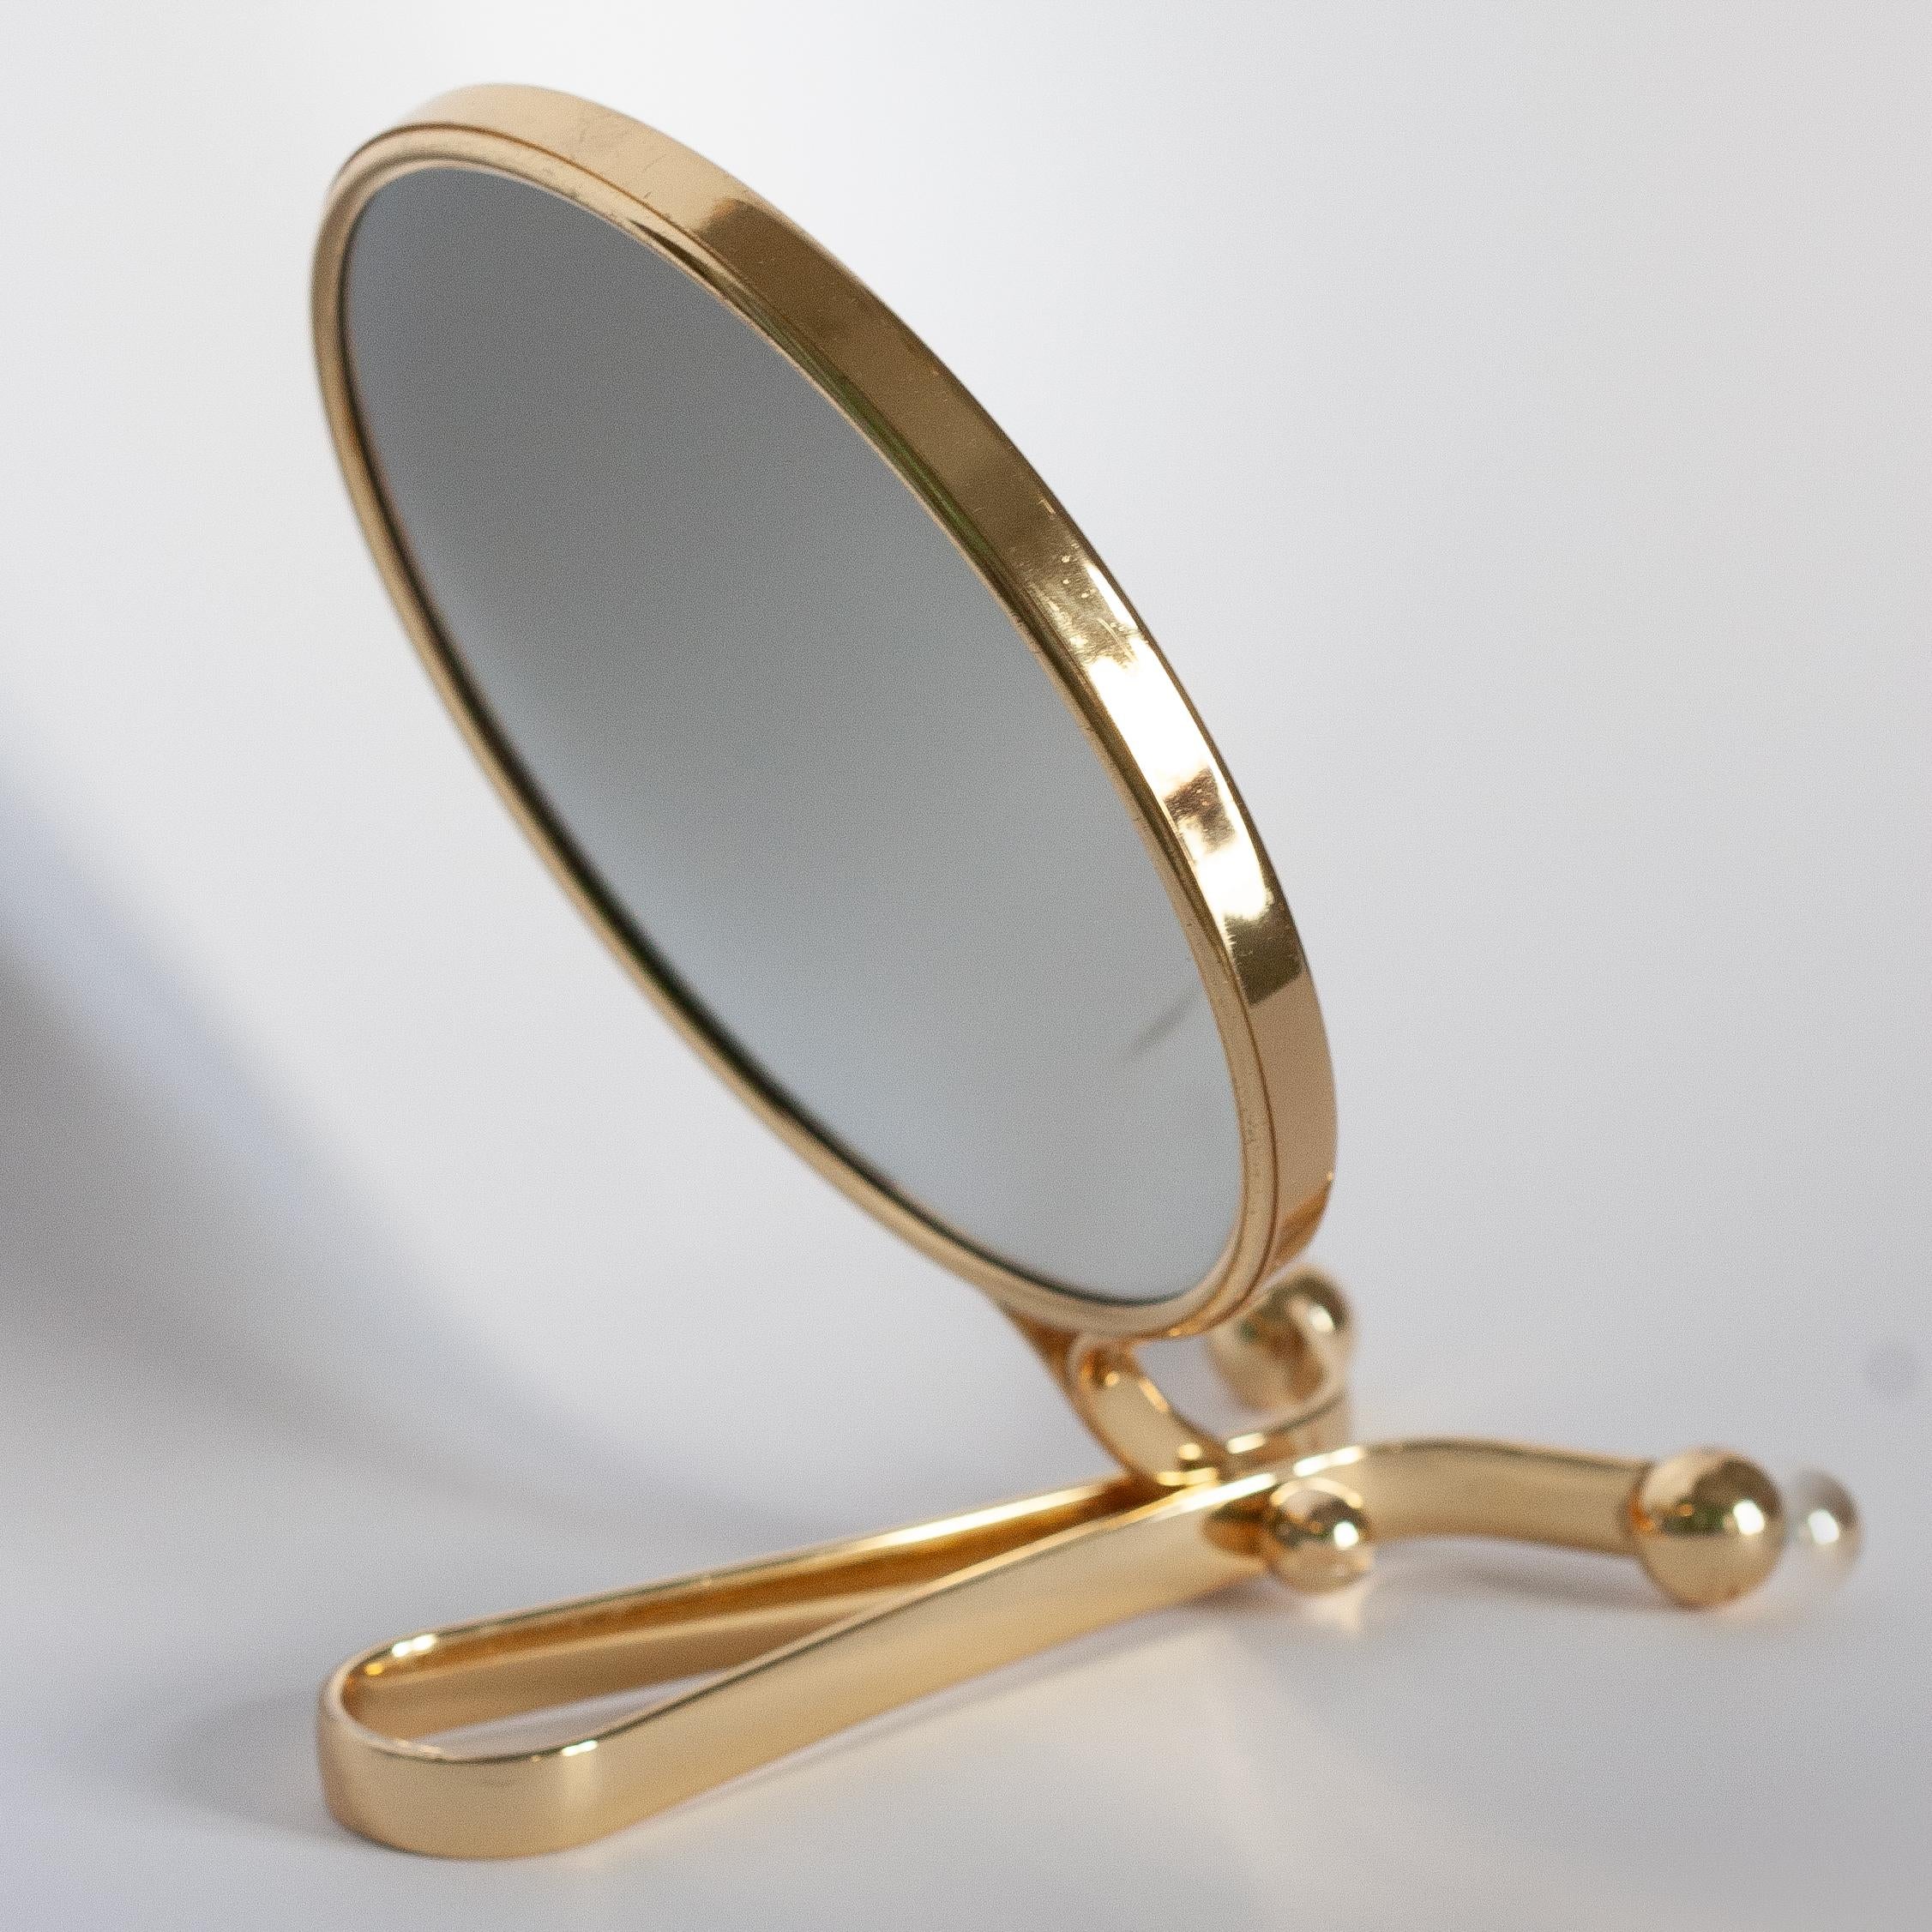 Italian Mid Century Gold Decorative Table Mirror in Metal Frame, Italy, 1960s For Sale